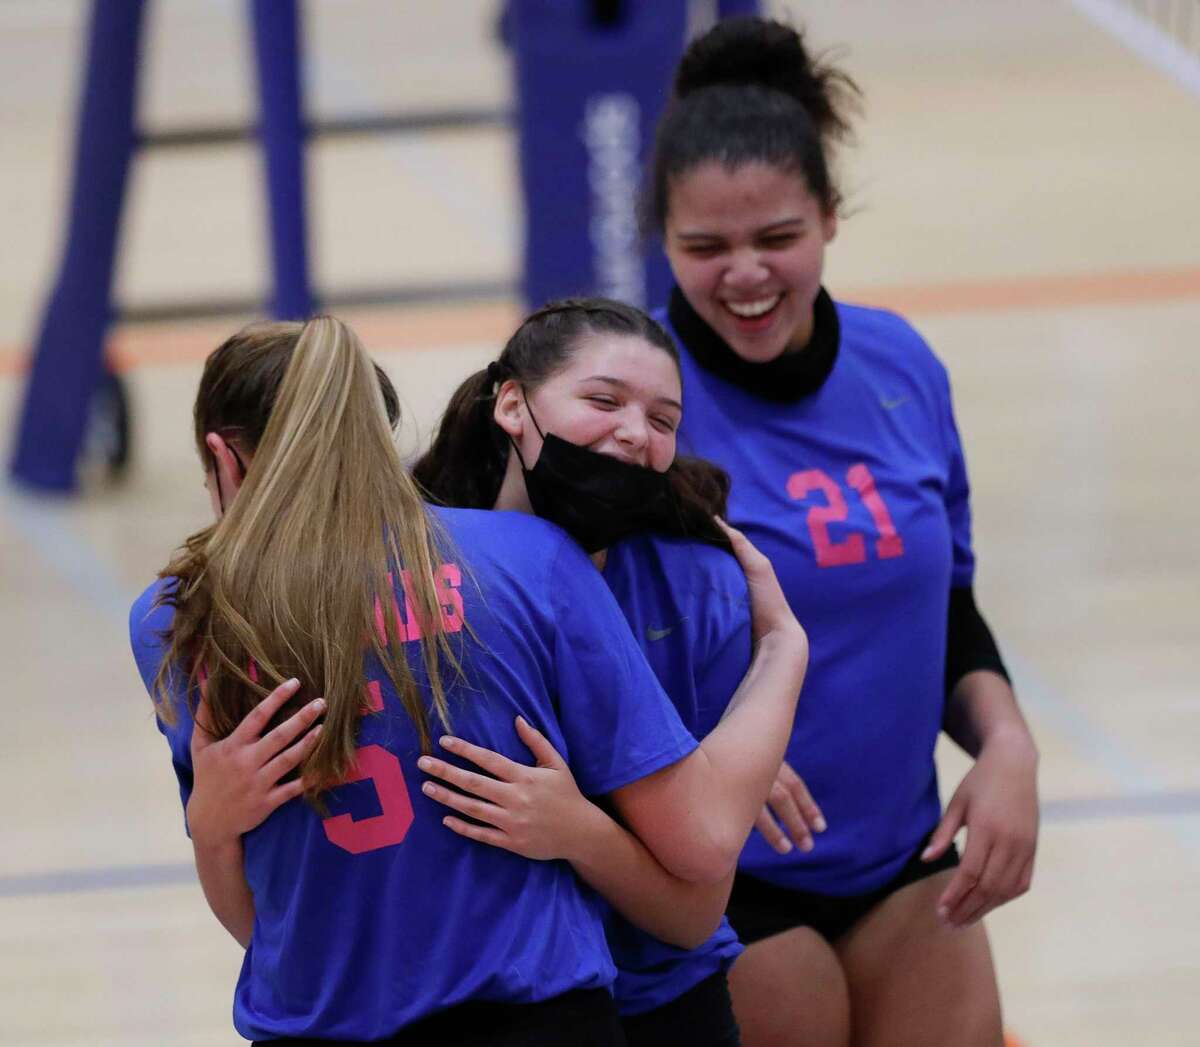 Grand Oaks right side hitter Emma Soniat (17) gets a hug from middle blocker Kamie Lohnes (5) after a block as outside hitter Fallon Thompson (21) looks on during the third set of a District 13-6A high school volleyball match at Grand Oaks High School, Tuesday, Oct. 13, 2020, in Spring. Grand Oaks swept College Park in straight sets.